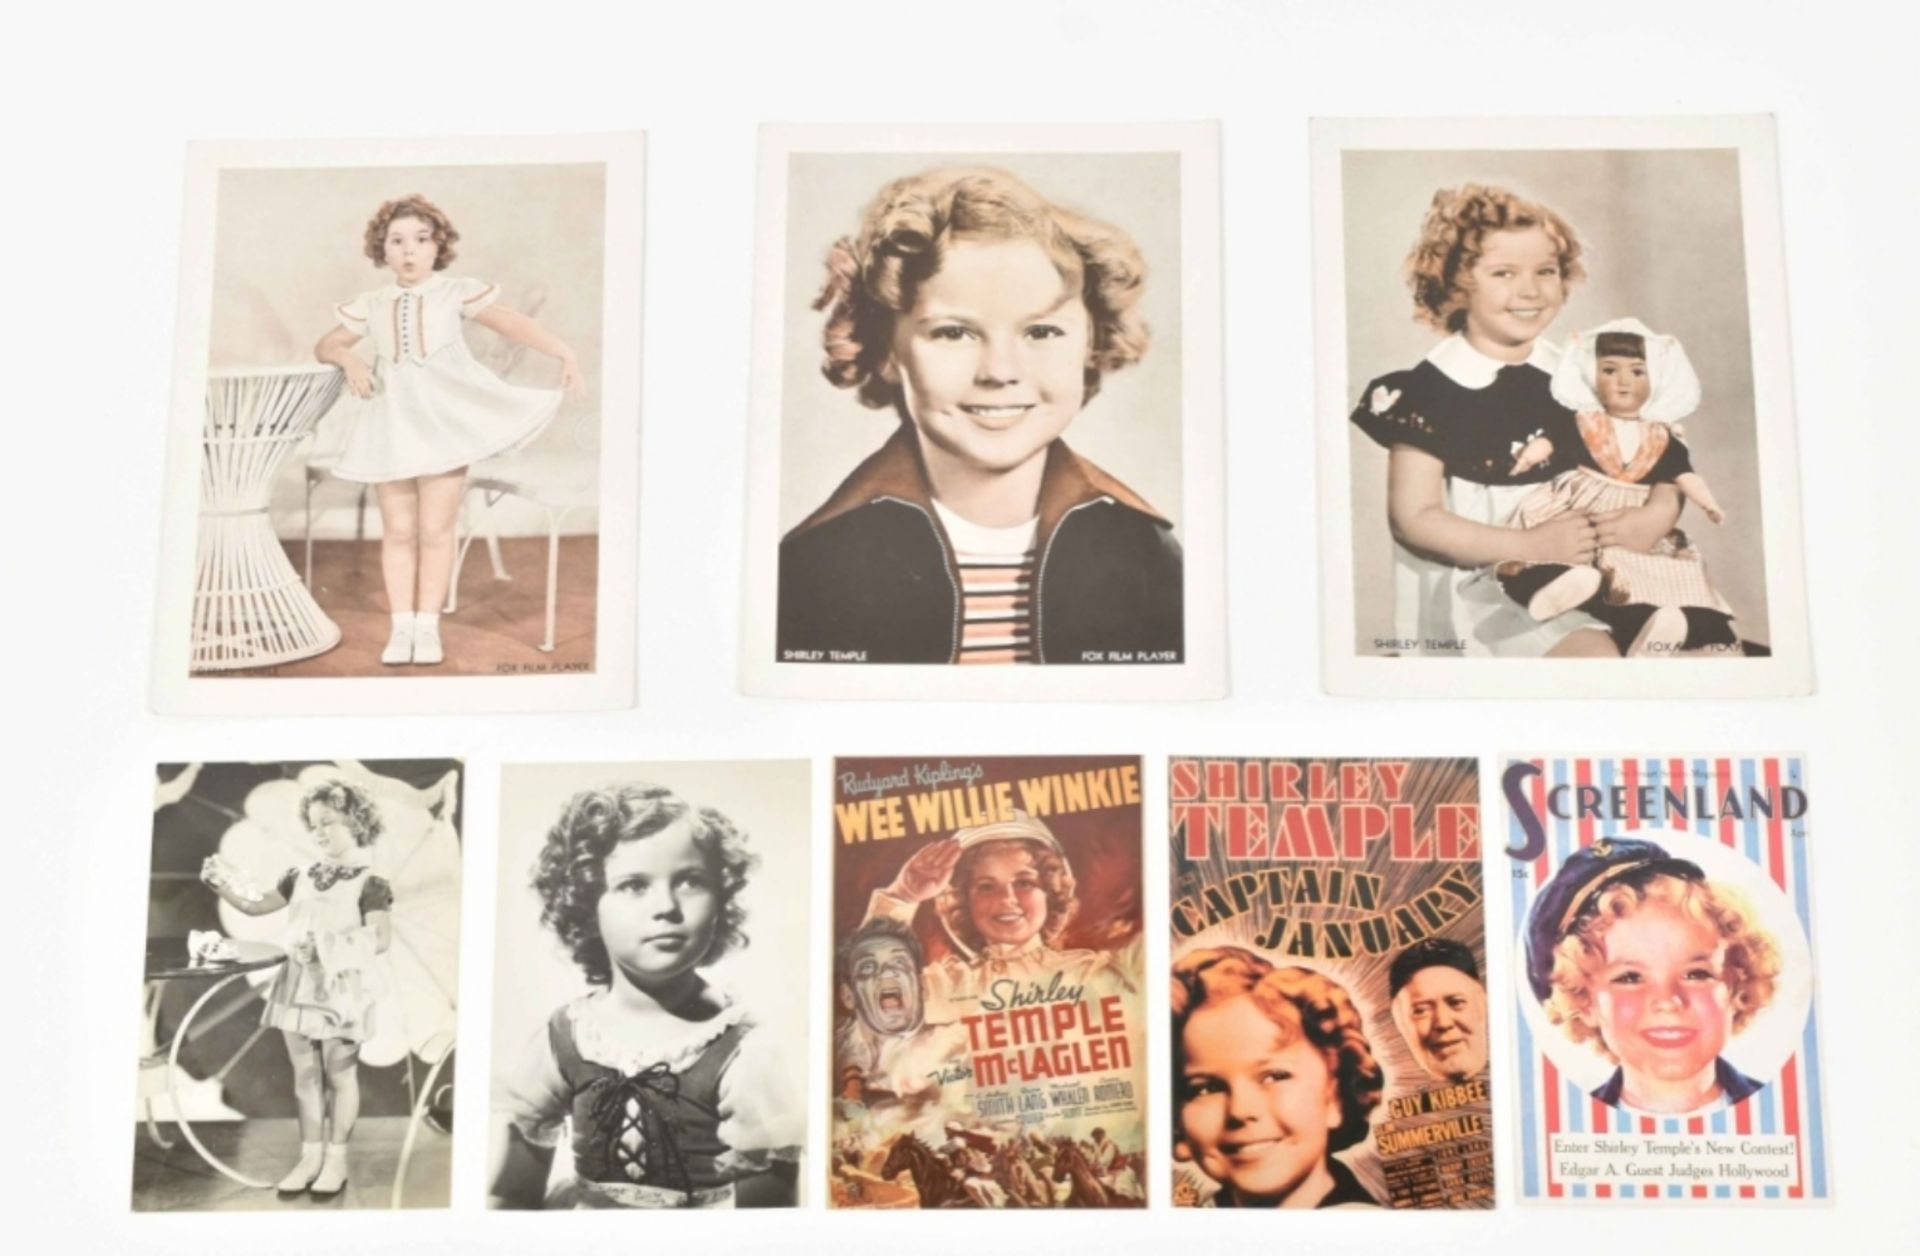 Shirley Temple at Play - Image 3 of 4